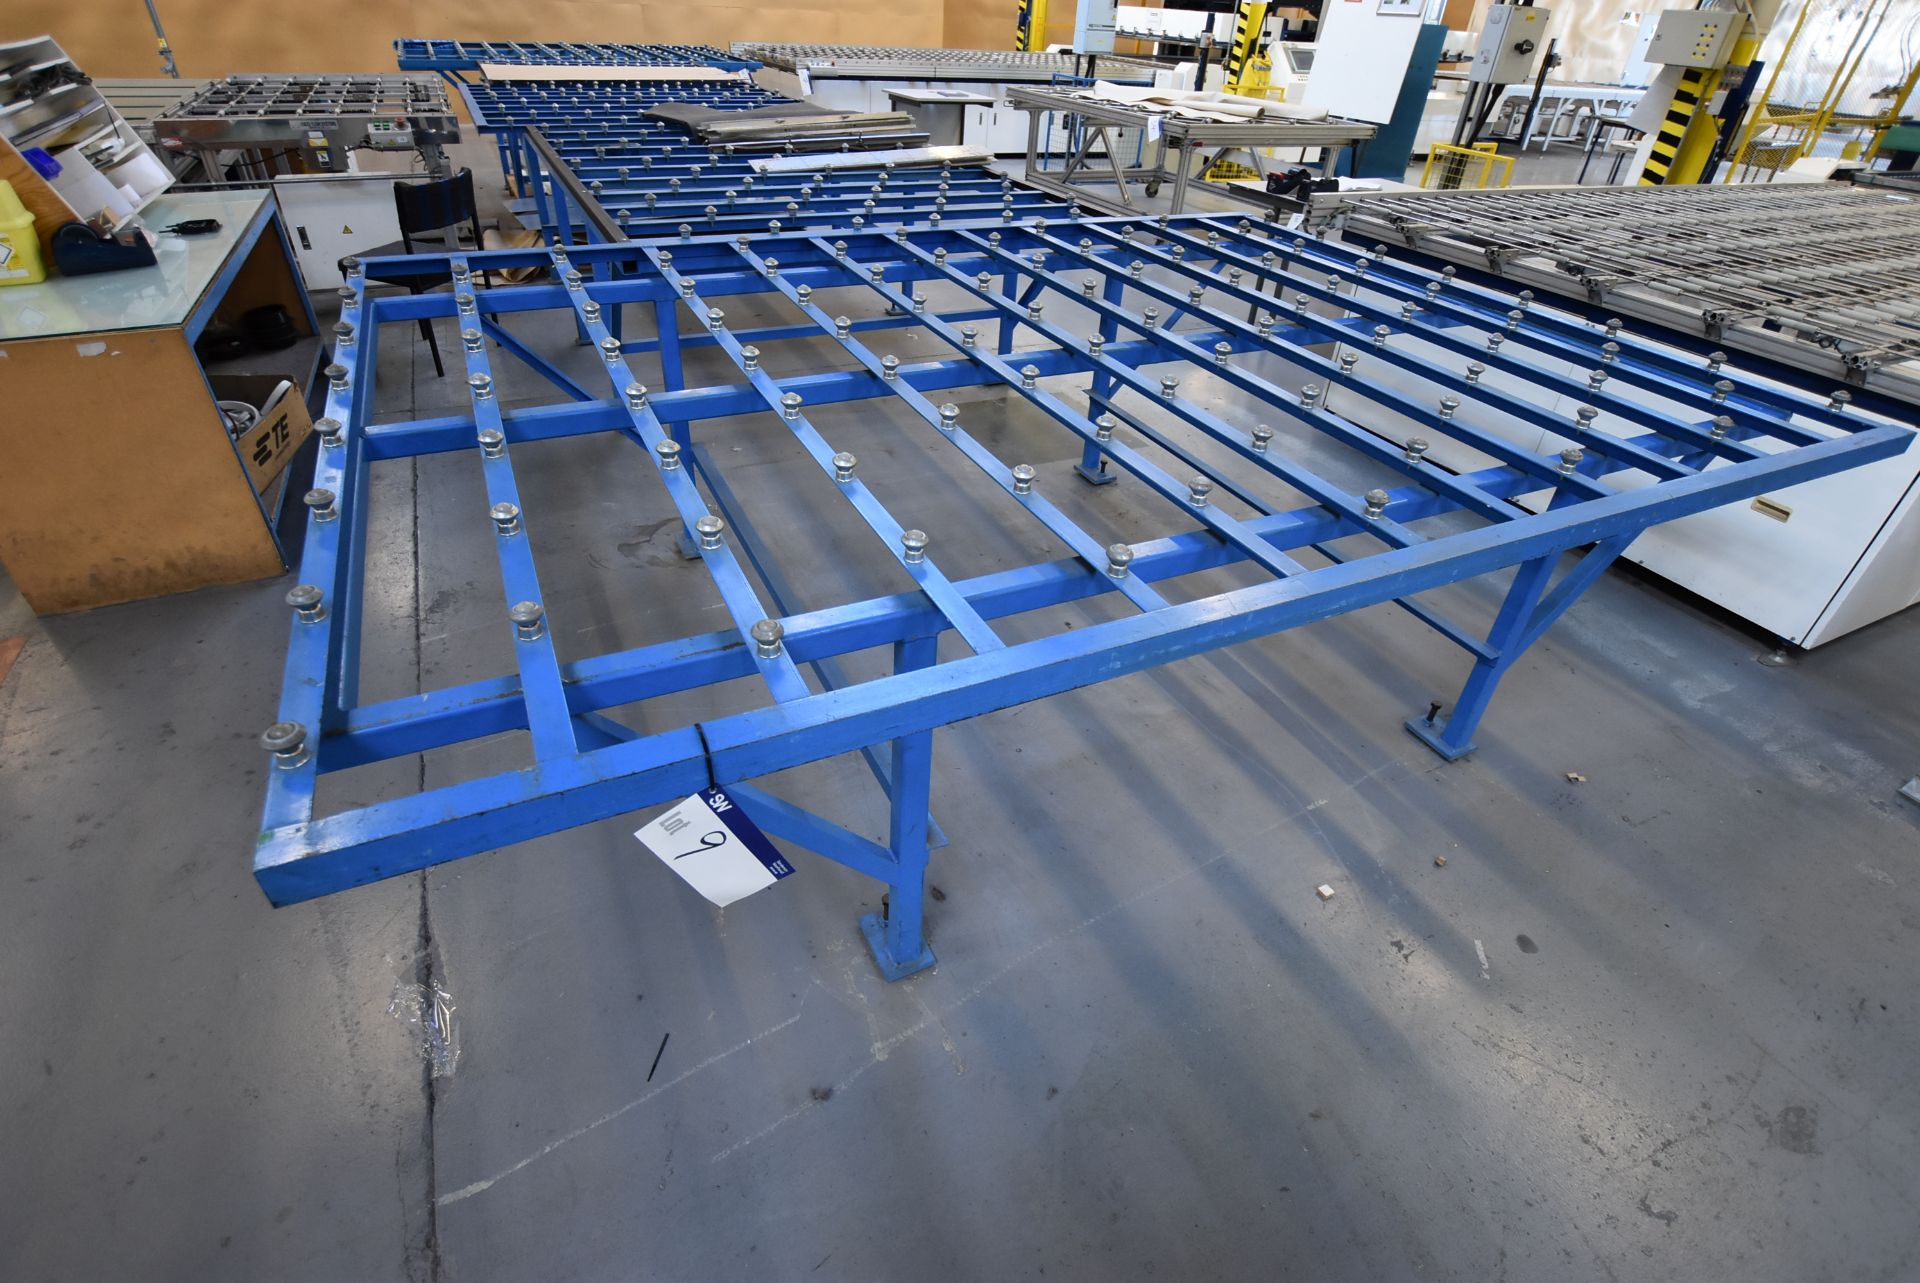 Stationary Steel Framed Roller Ball Feed Table, approx. 3m x 2.24m x 870mm high